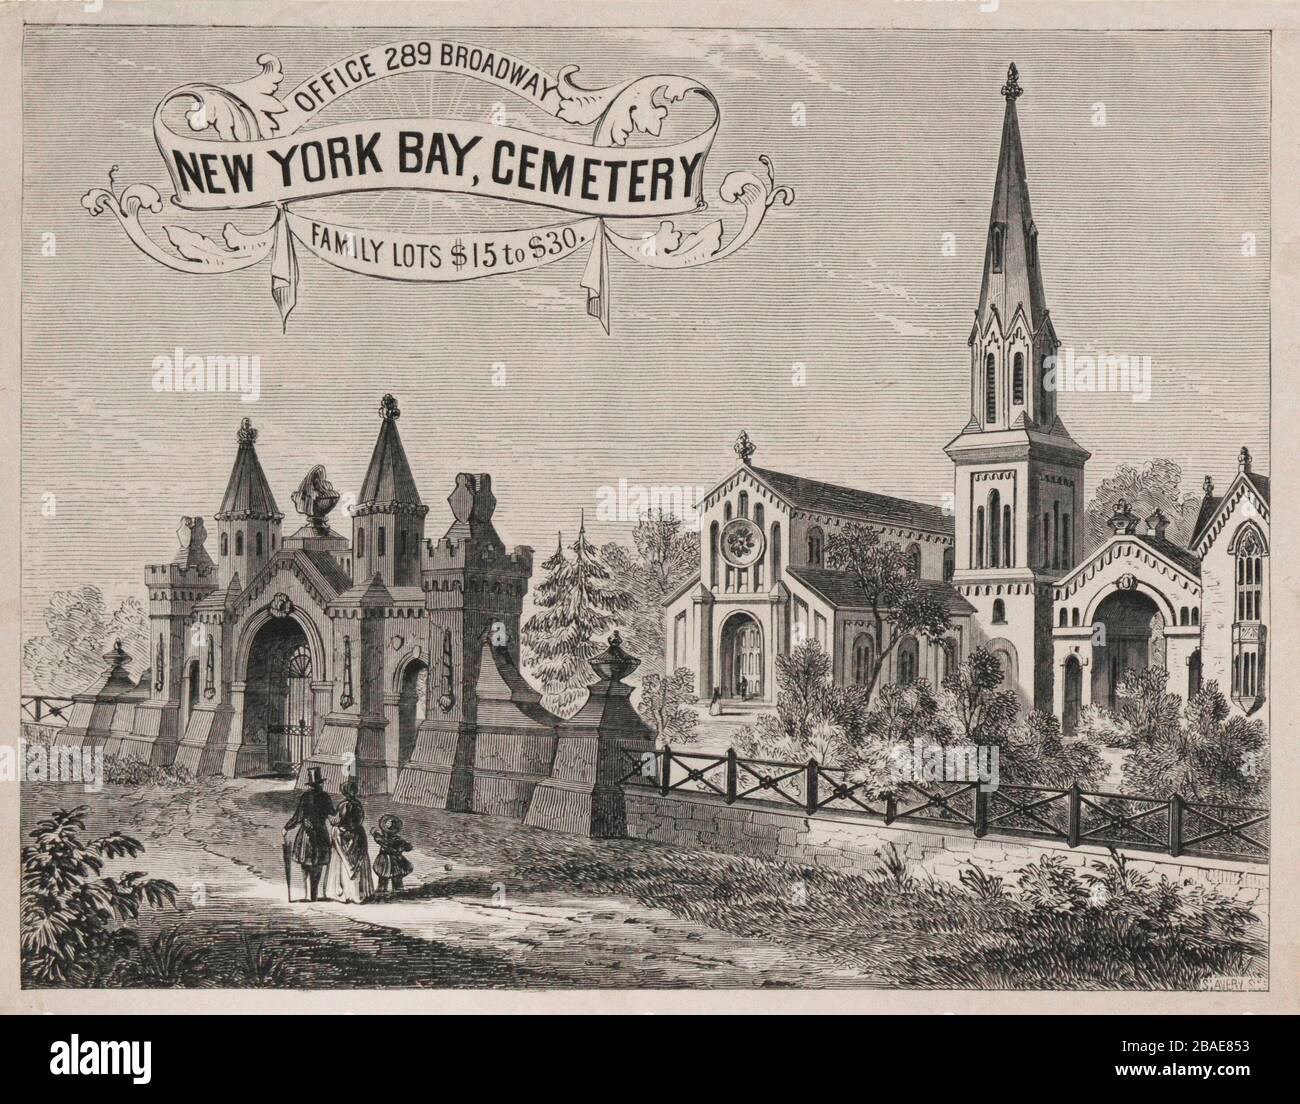 Old Engraving of New York Bay, Cemetry. By Samuel Putnam Avery, 1822-1904. Stock Photo